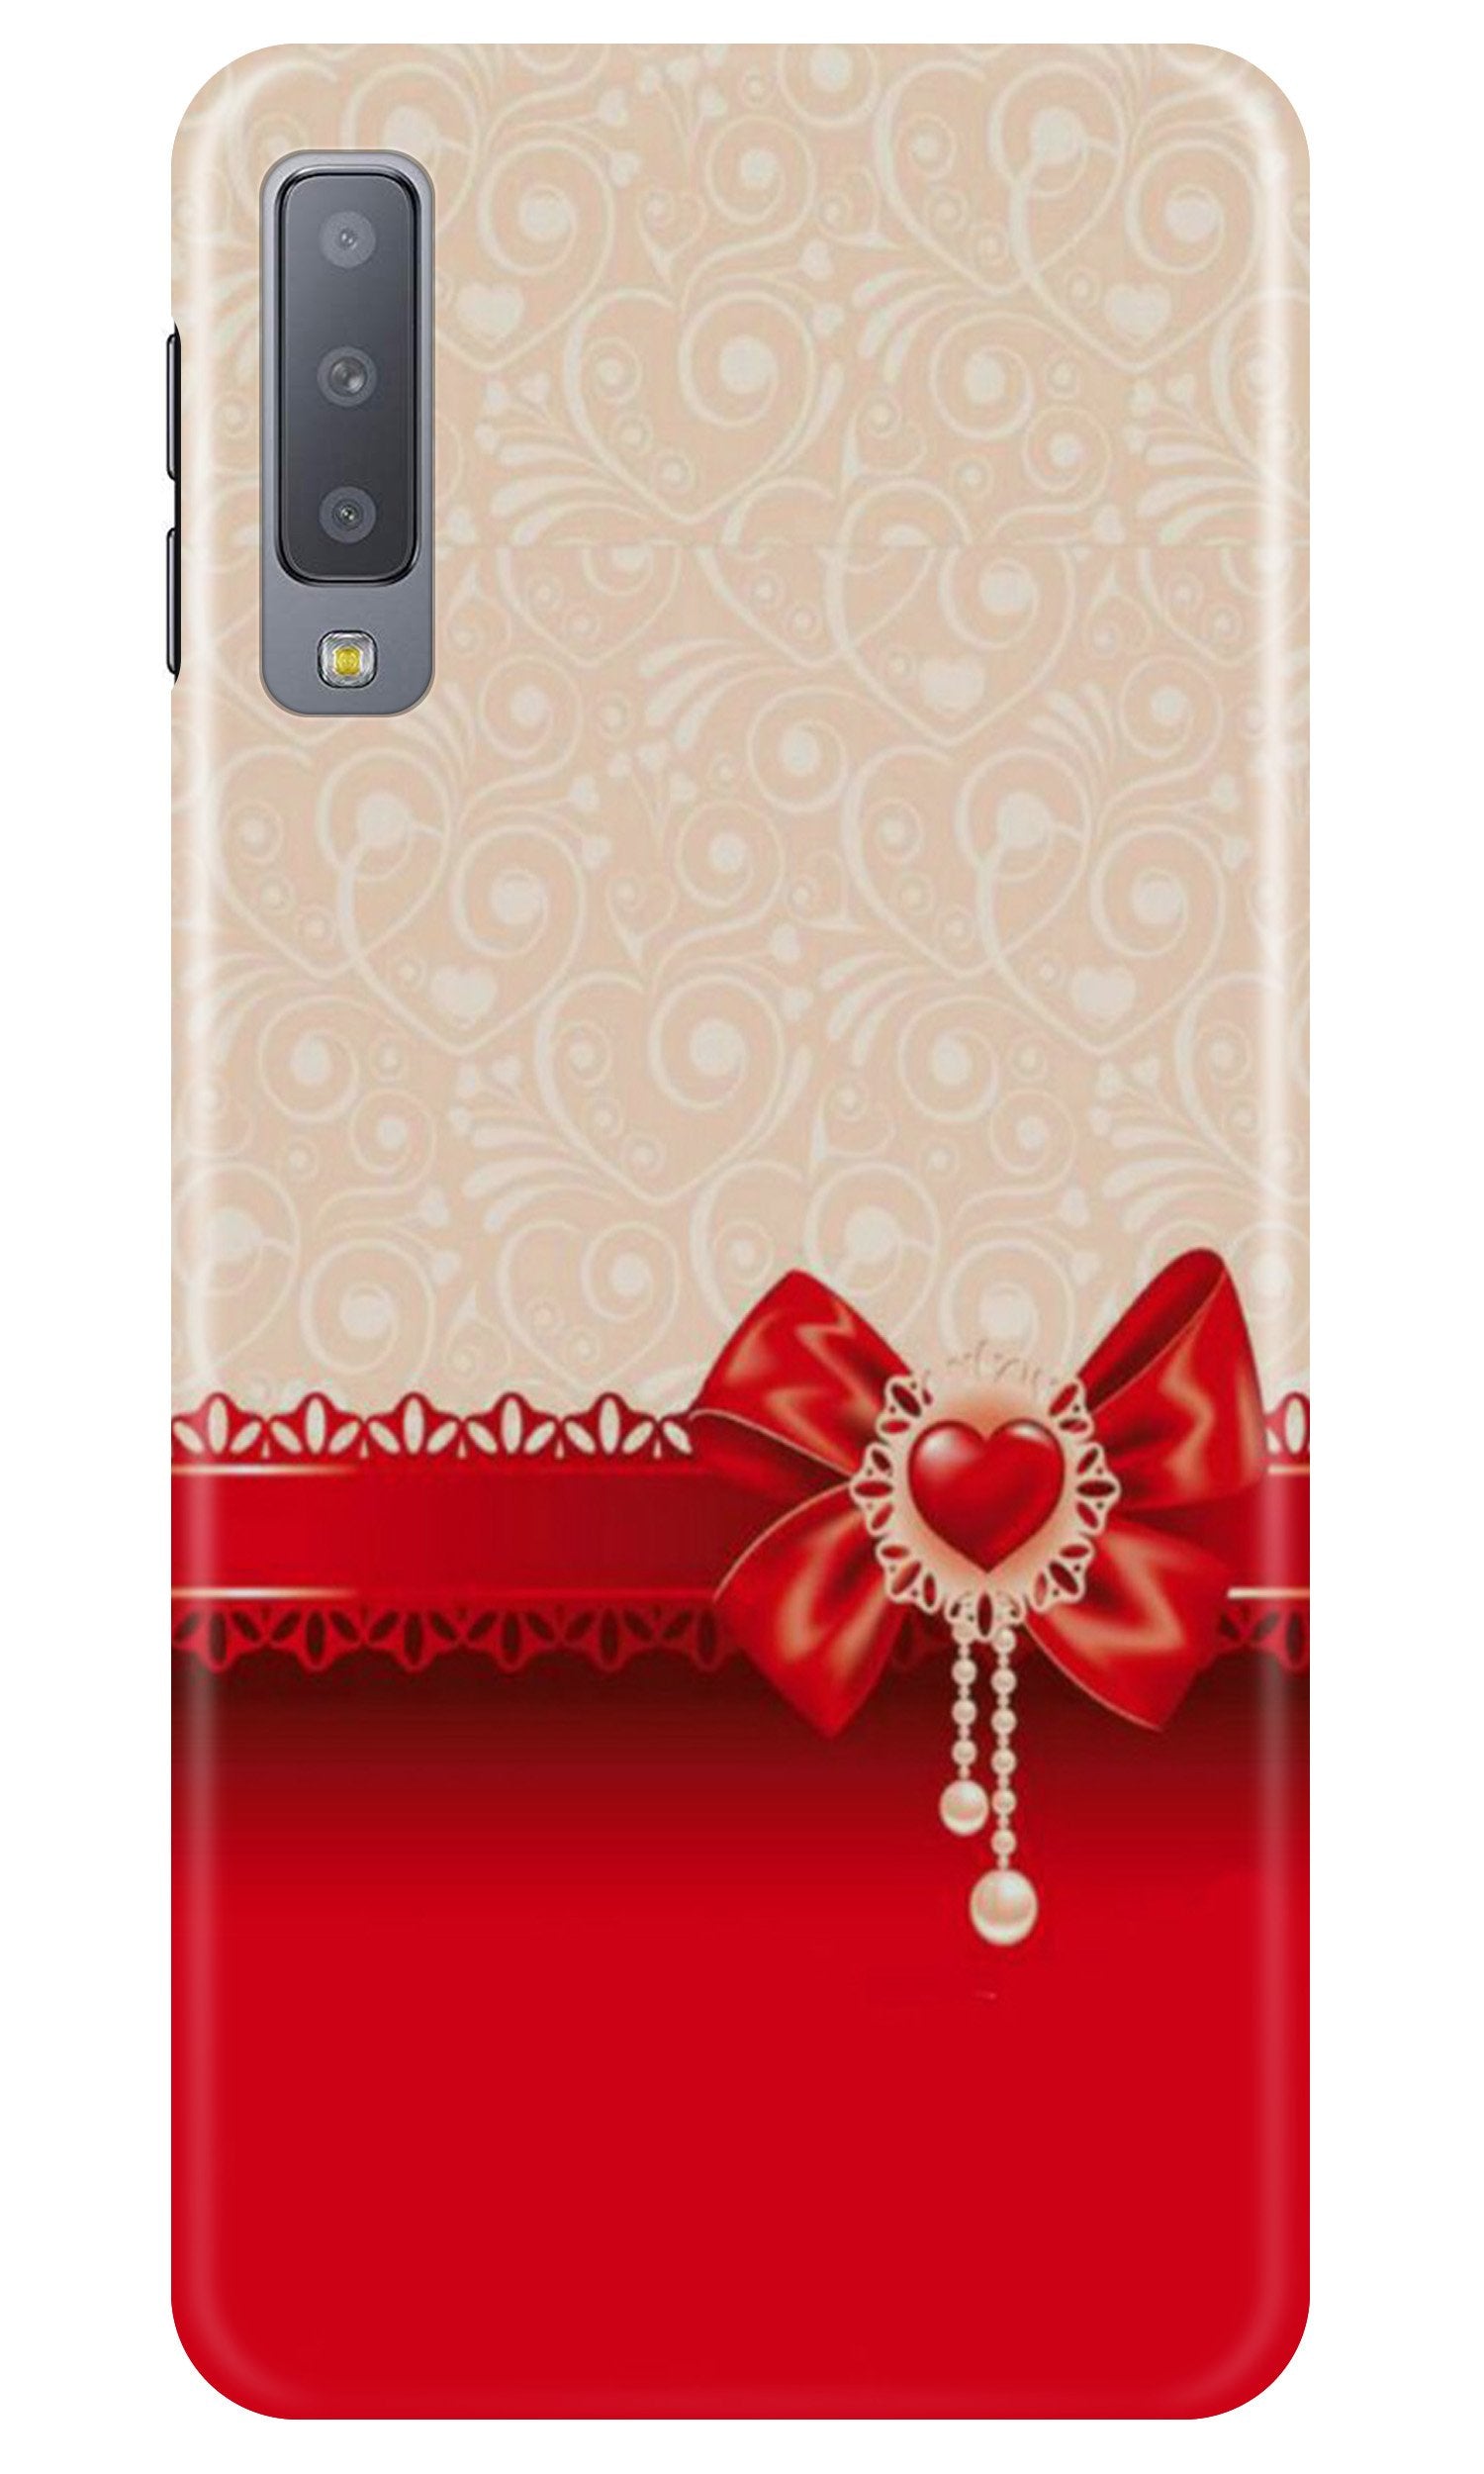 Gift Wrap3 Case for Samsung Galaxy A30s